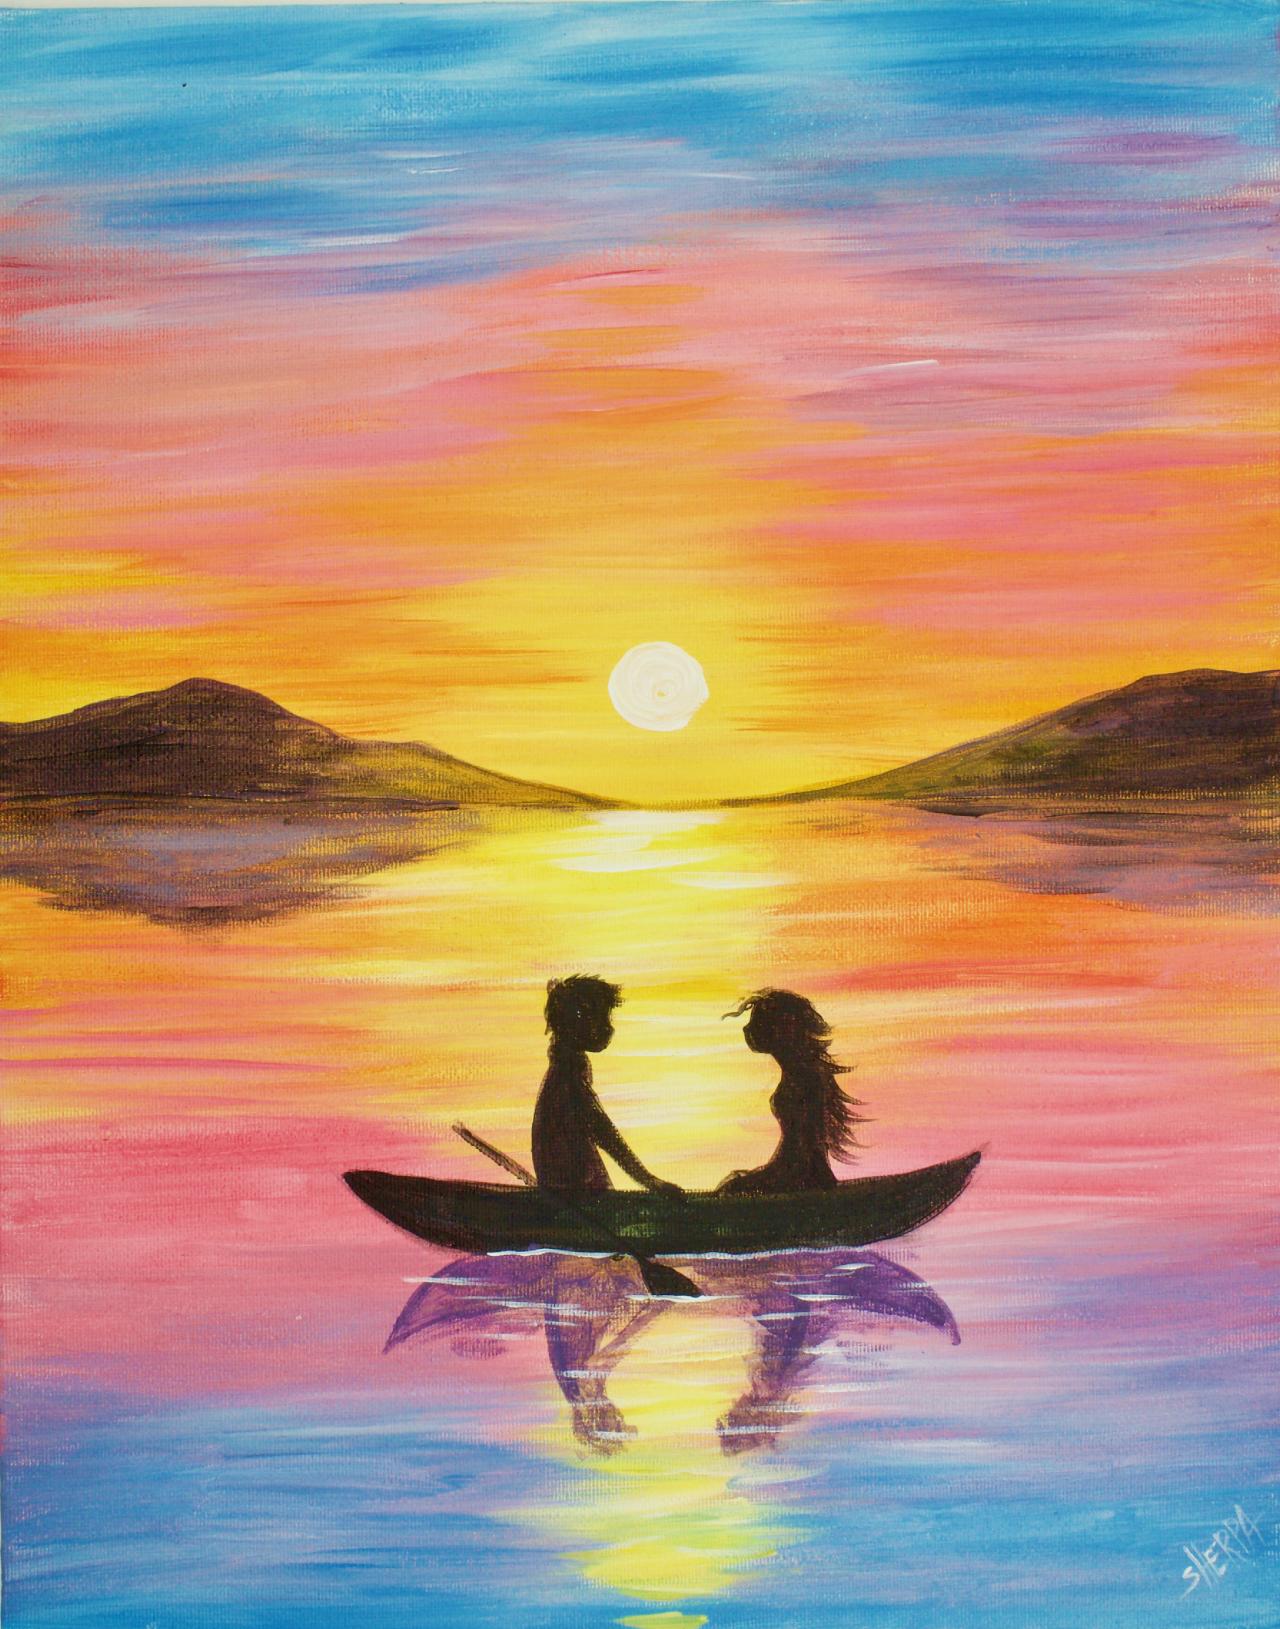 Lovers Boat Painting With Sunset The Art Sherpa Gallery The